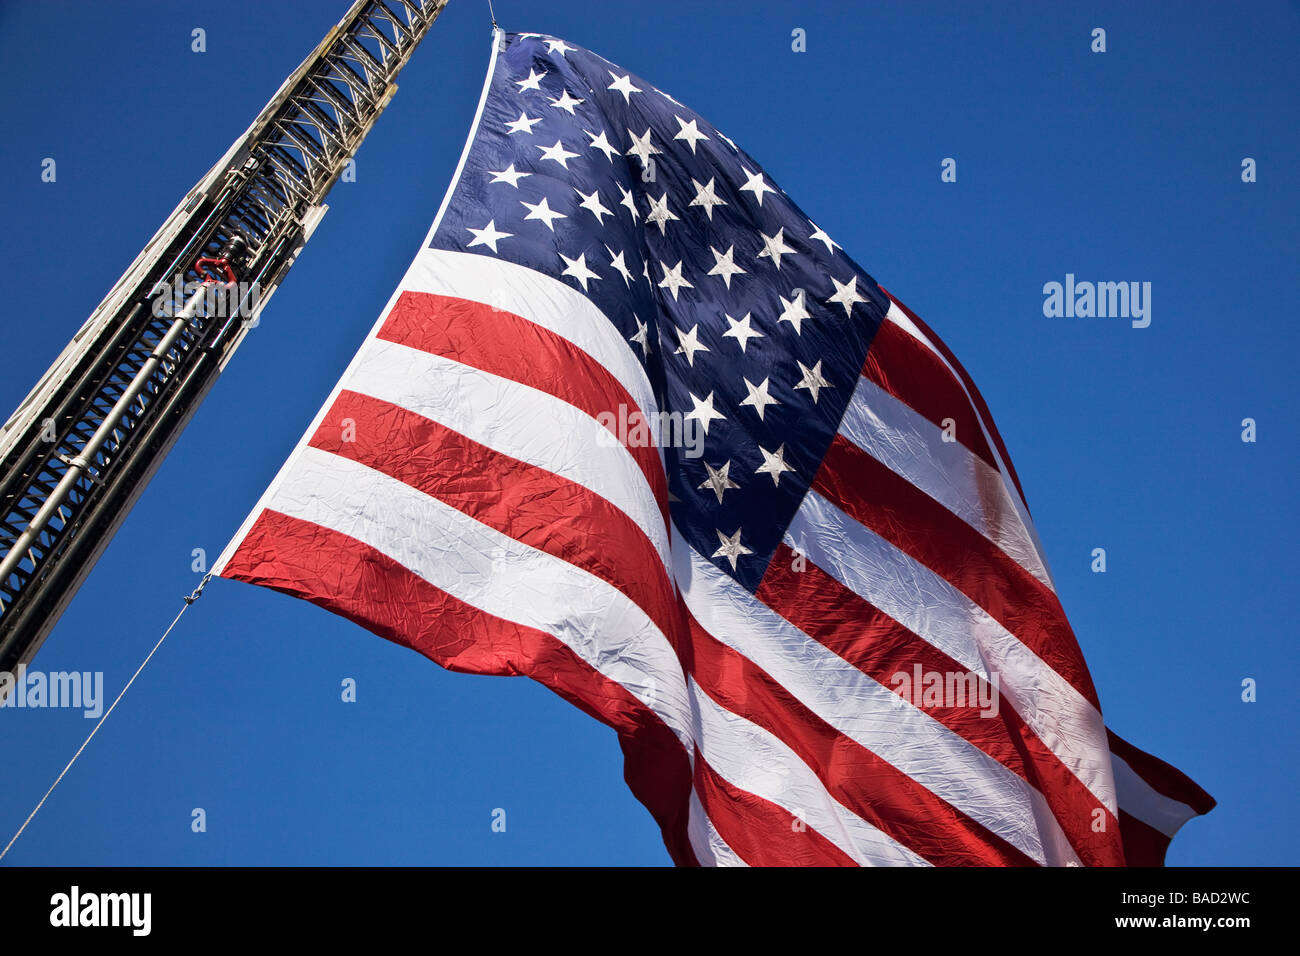 United States flag against a blue sky. Tea Party 2009 Stock Photo